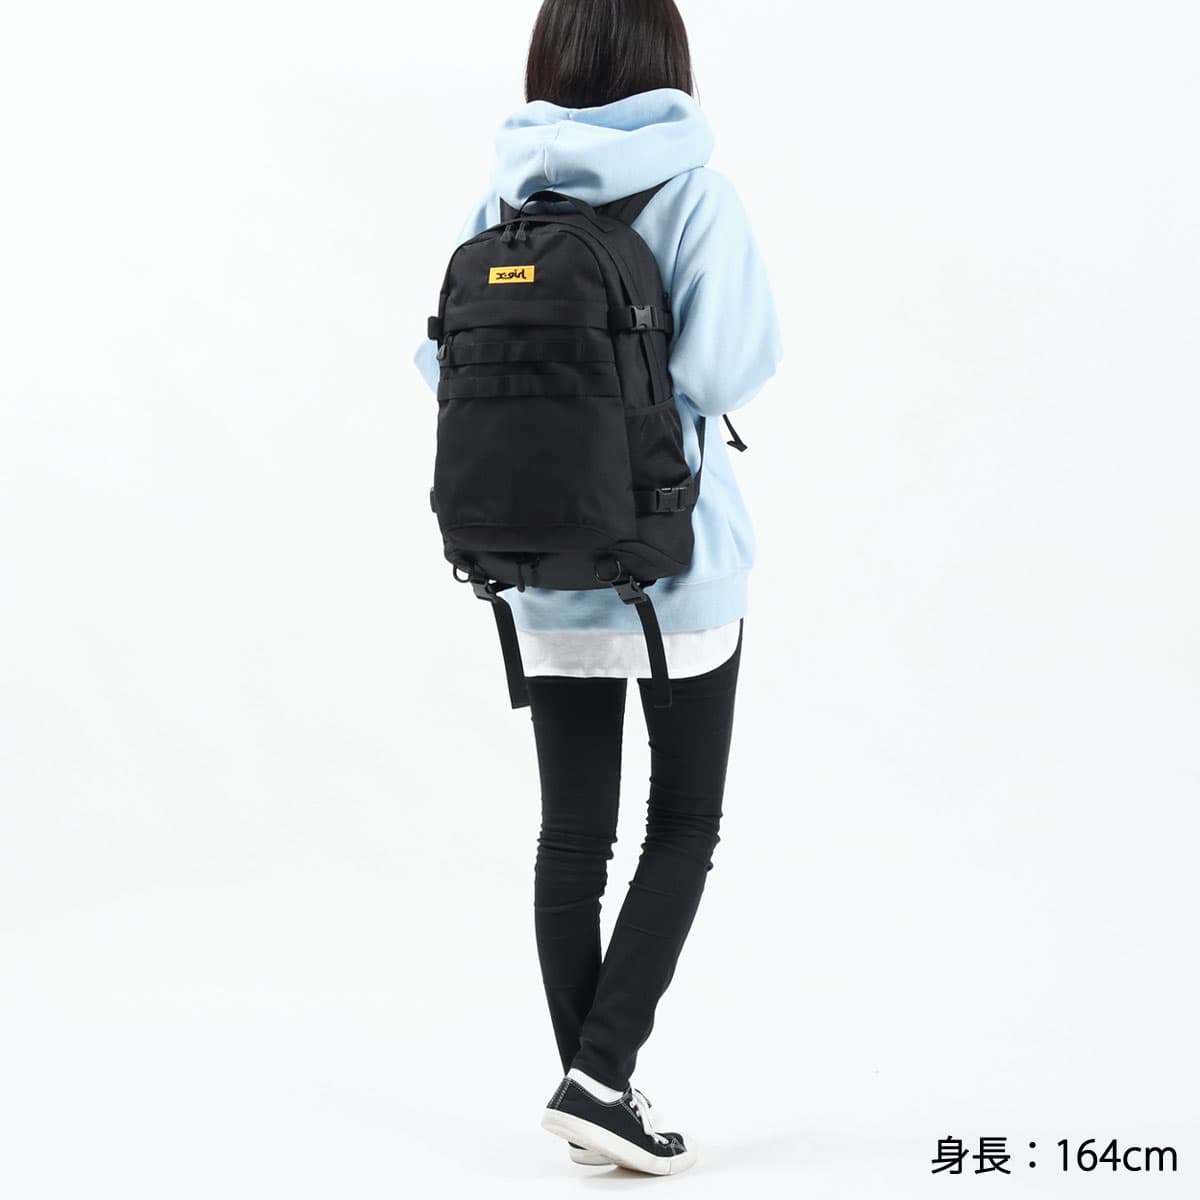 X-girl エックスガール MILLS LOGO ADVENTURE BACKPACK バックパック